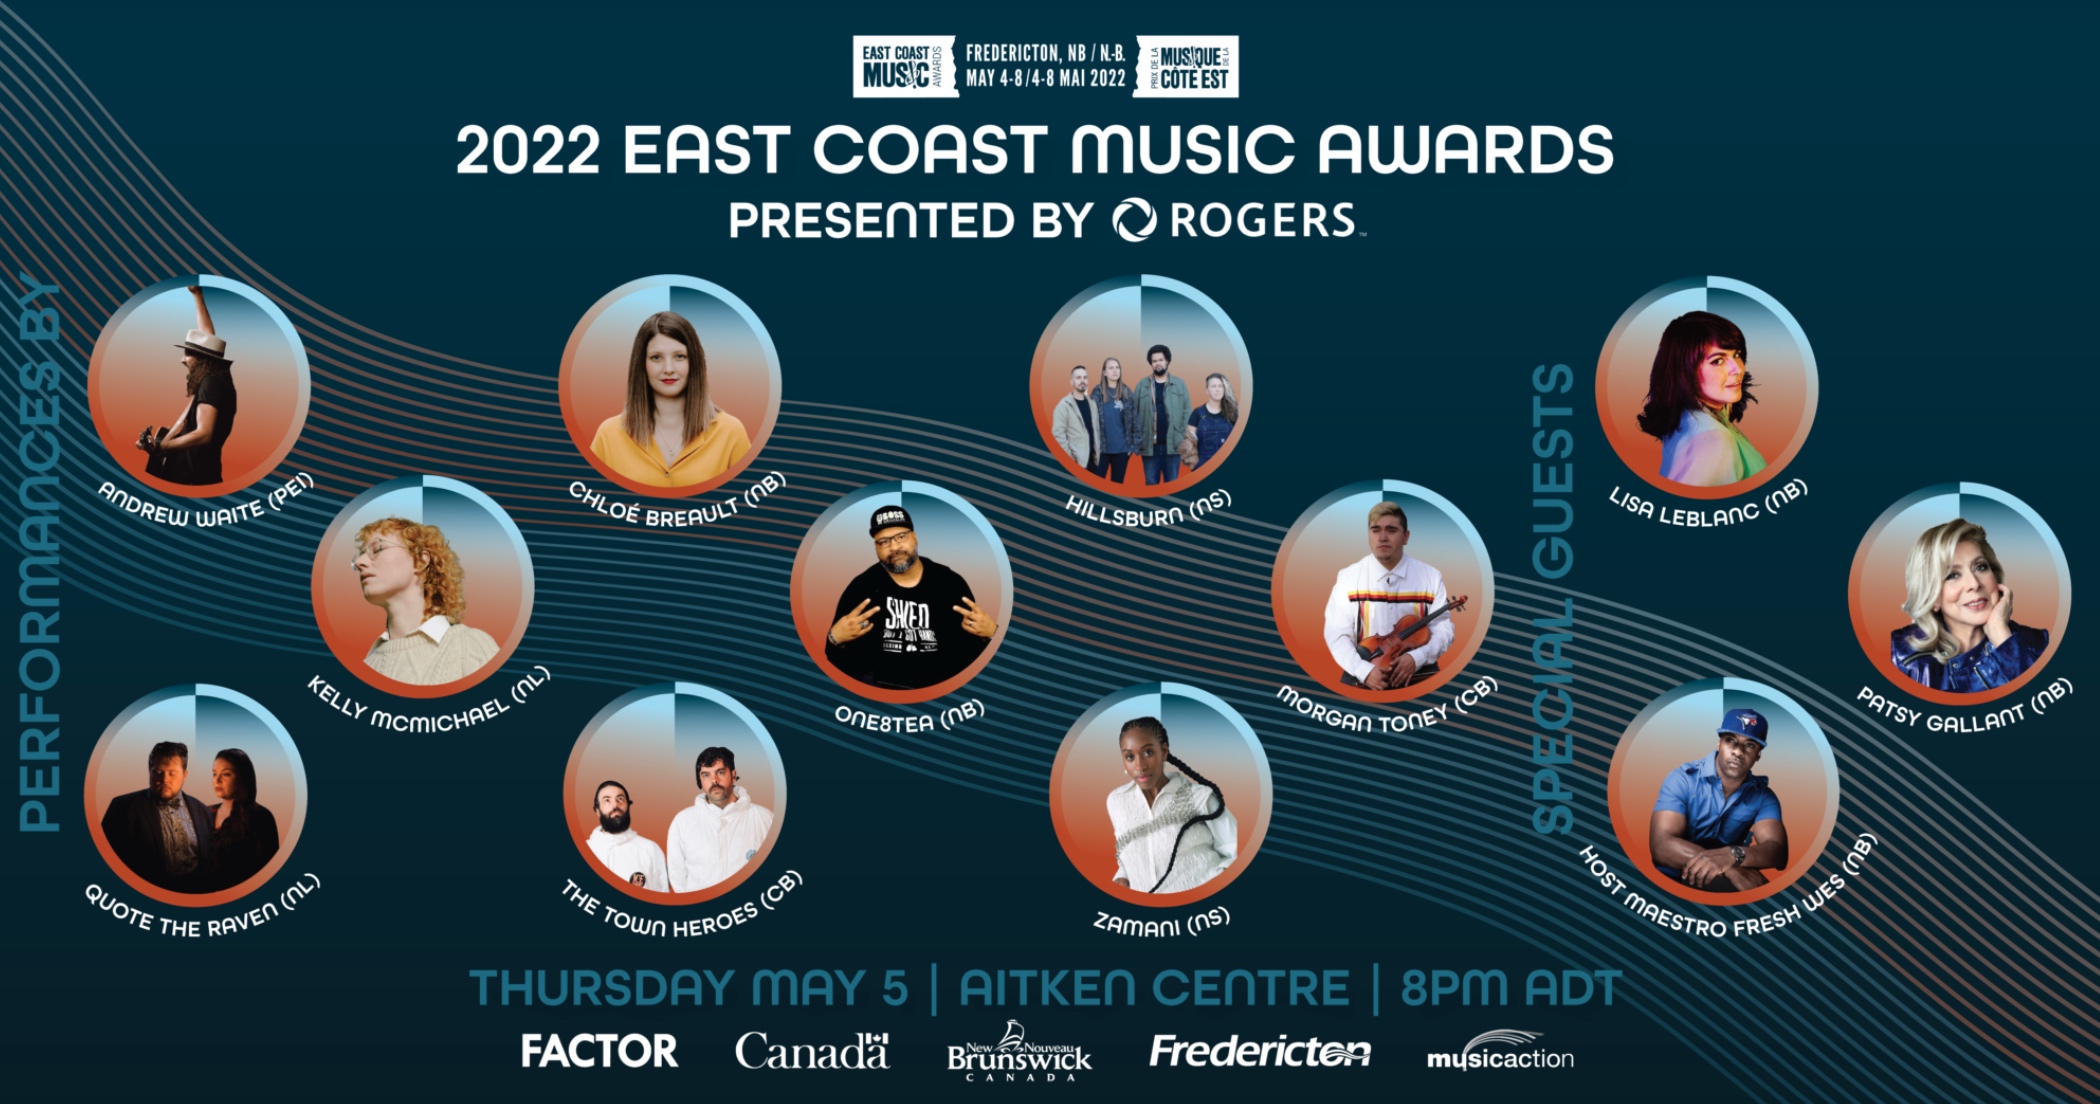 2022 East Coast Music Awards, images of performers: Andrew Waite, Quote the Raven, Kelly McMichael, Chloe Breault, the Town Heroes, One8tea, Hillsburn, Zamani, Morgan Toney, Lisa Leblanc, Host Maestro Fresh Wes and, Patsy Gallant.